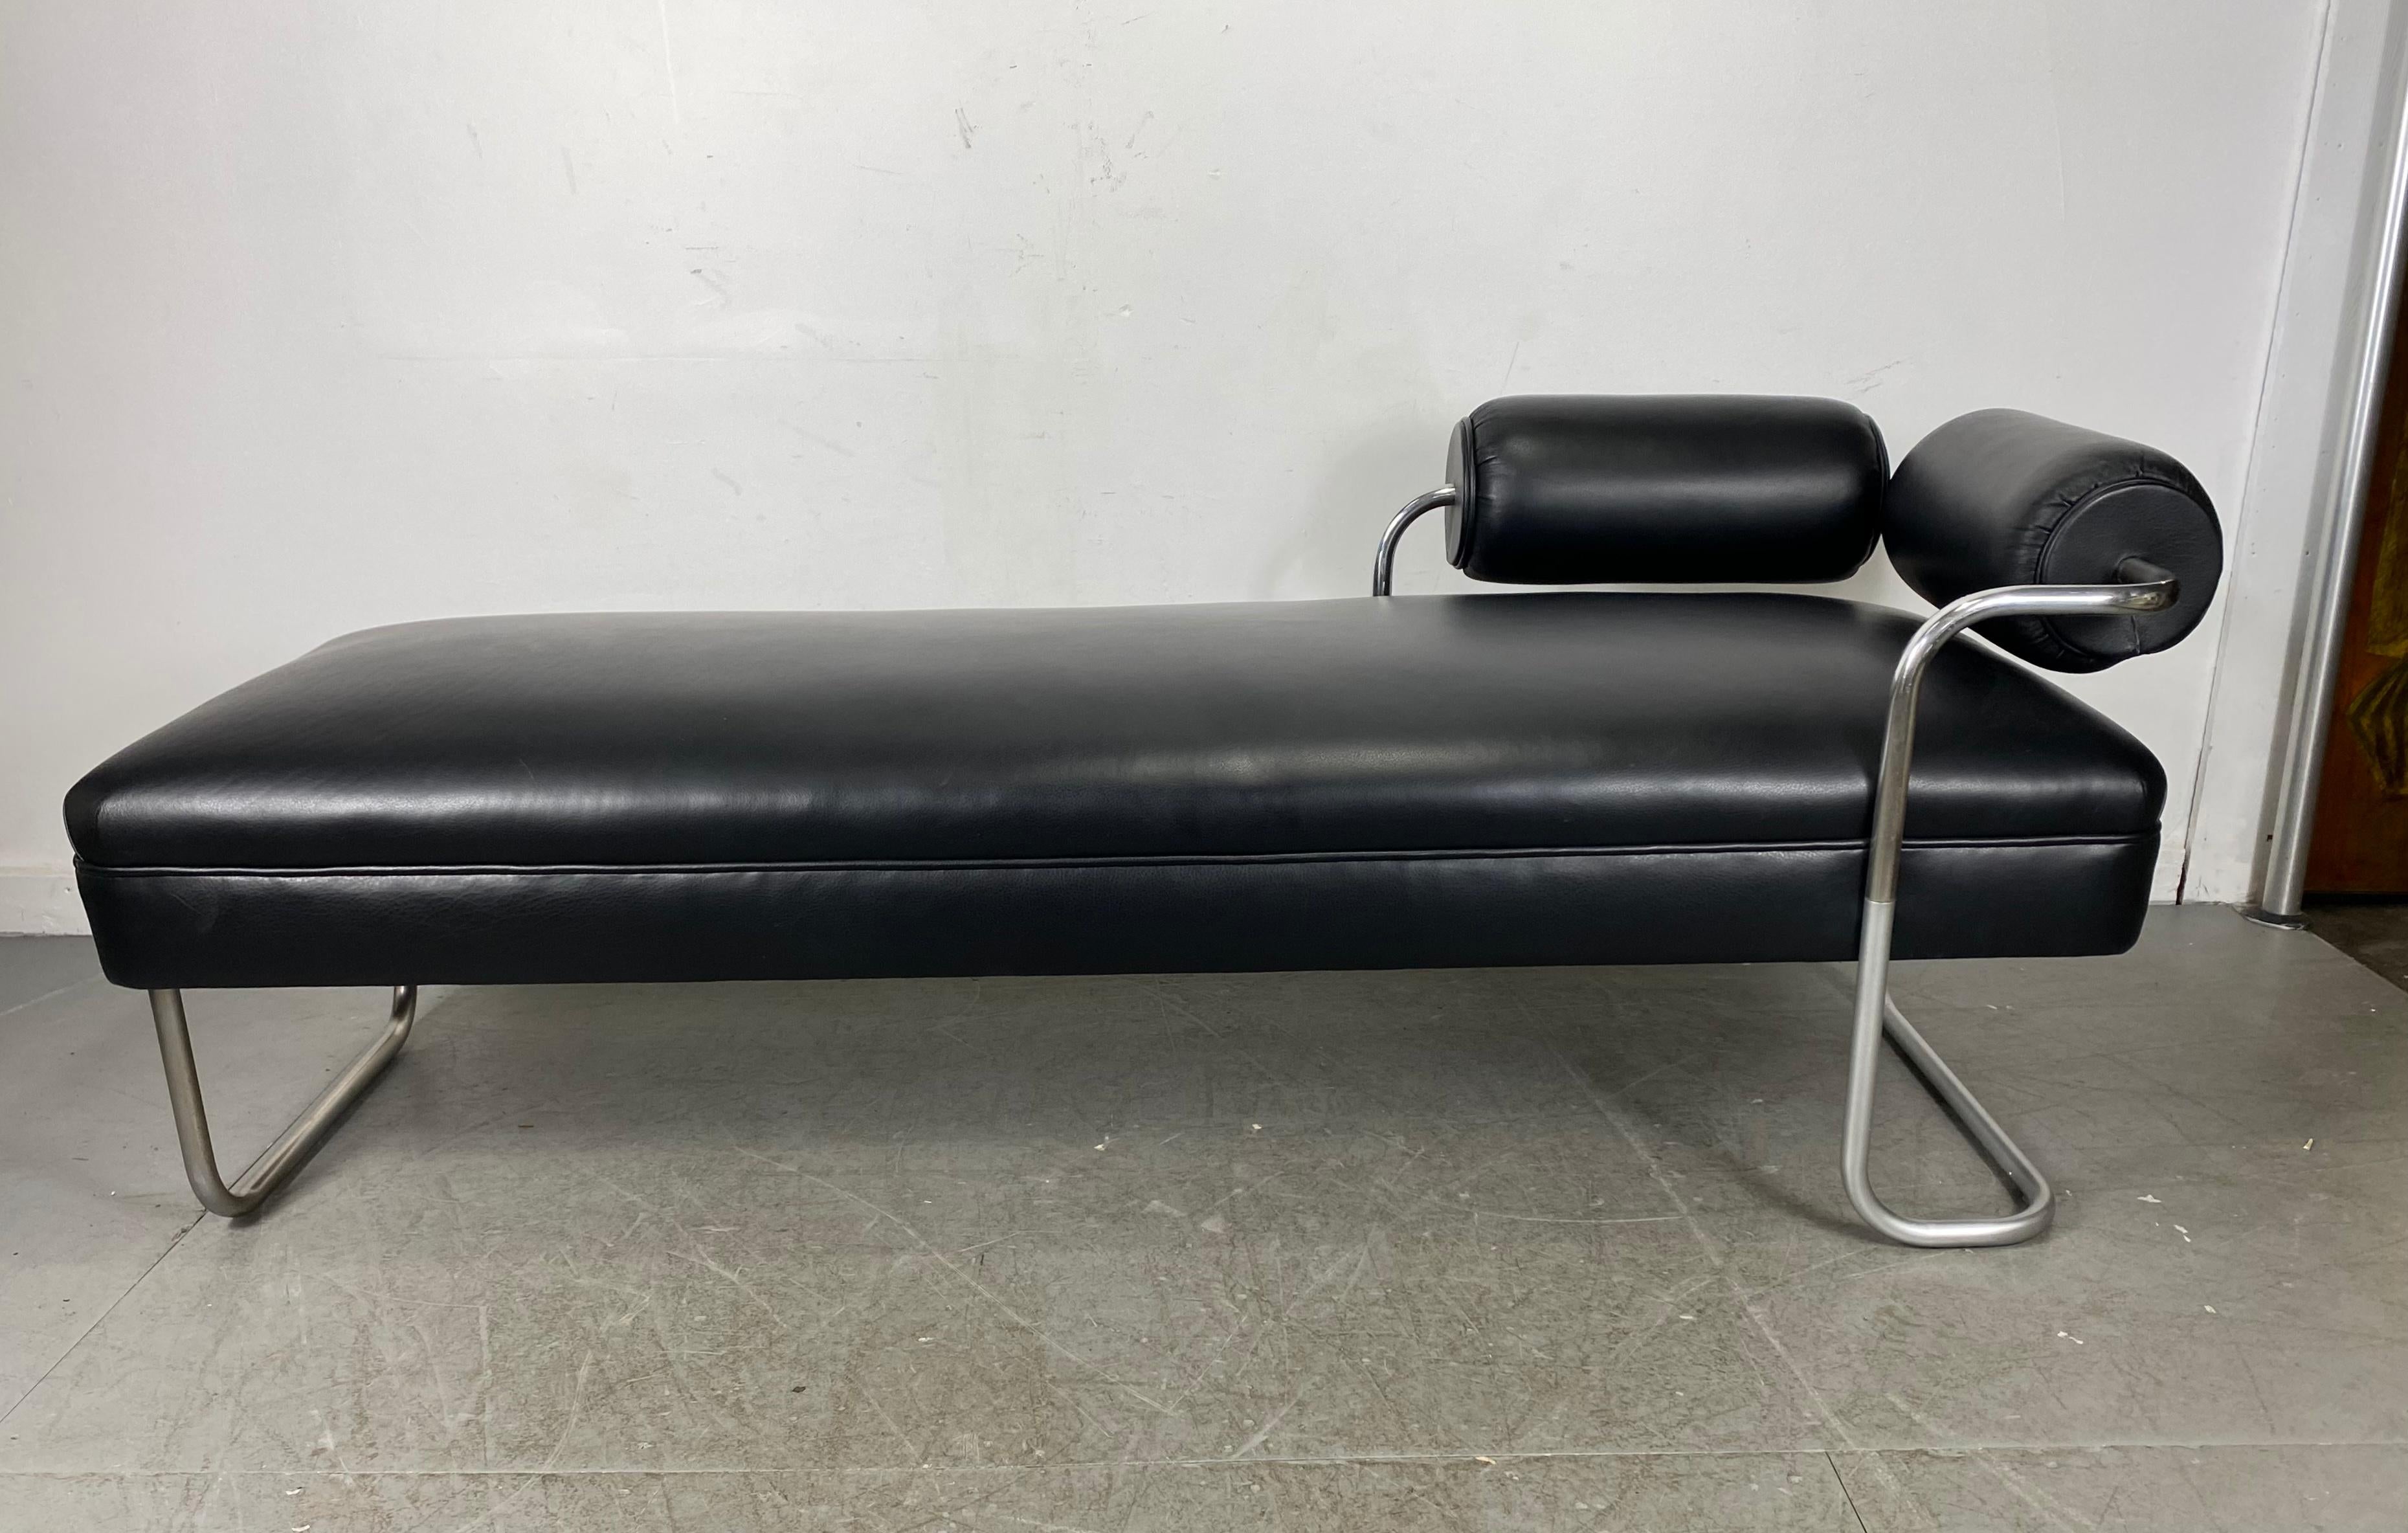 Unusual Tubular Chrome and Leather Bauhaus Chaise Lounge / Daybed 2